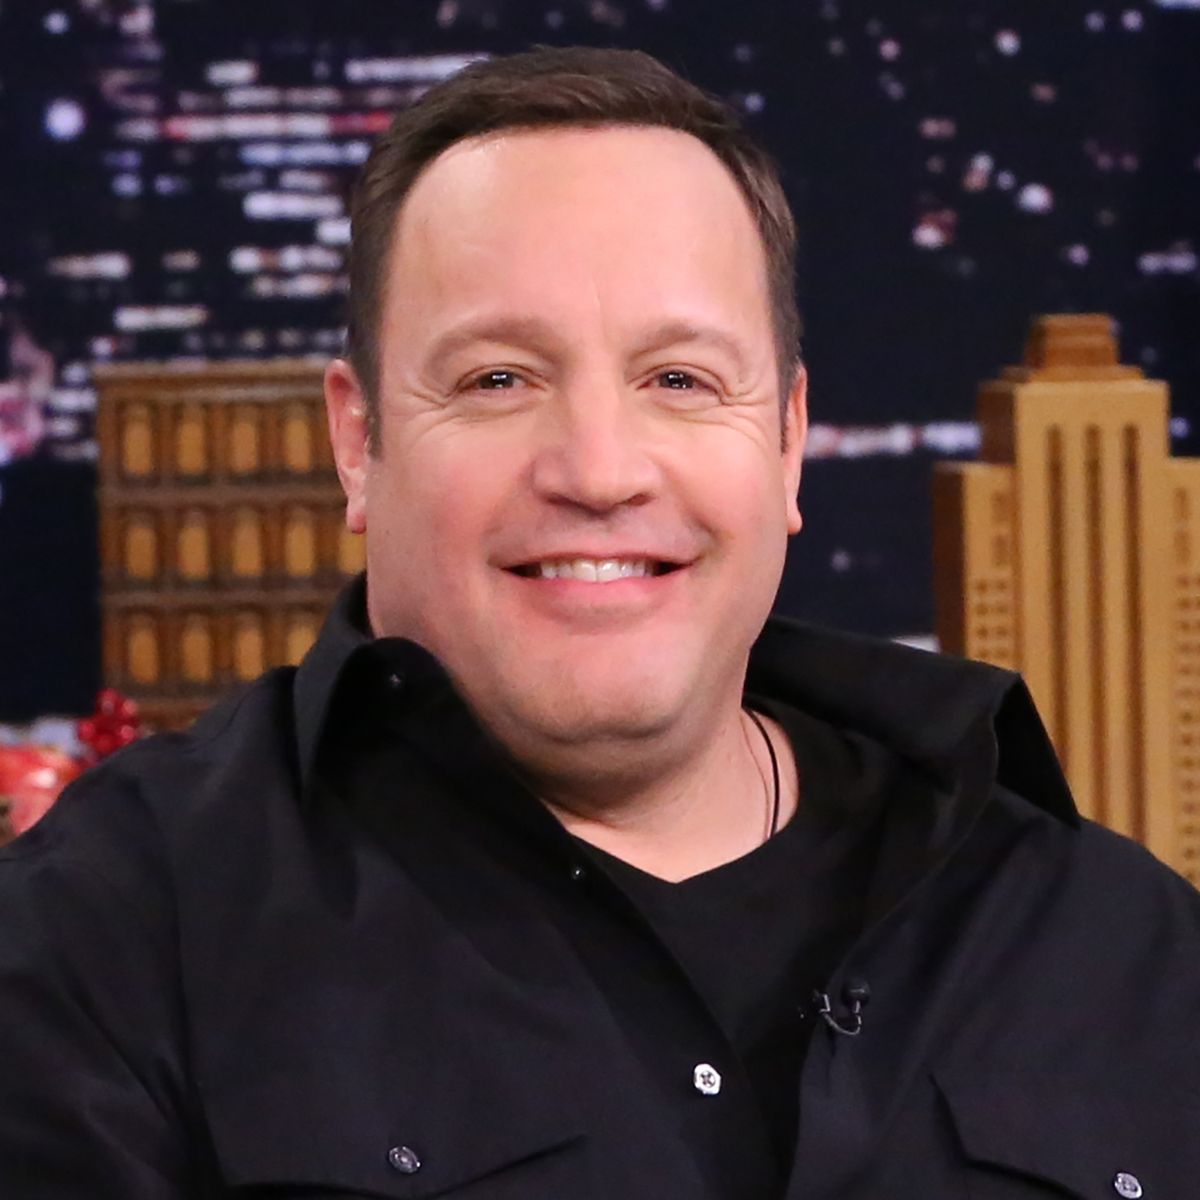 The Tonight Show Starring Jimmy Fallon - Season 4THE TONIGHT SHOW STARRING JIMMY FALLON -- Episode 0578 -- Pictured: Actor Kevin James during an interview on November 24, 2016 -- (Photo by: Andrew Lipovsky/NBCU Photo Bank/NBCUniversal via Getty Images via Getty Images)